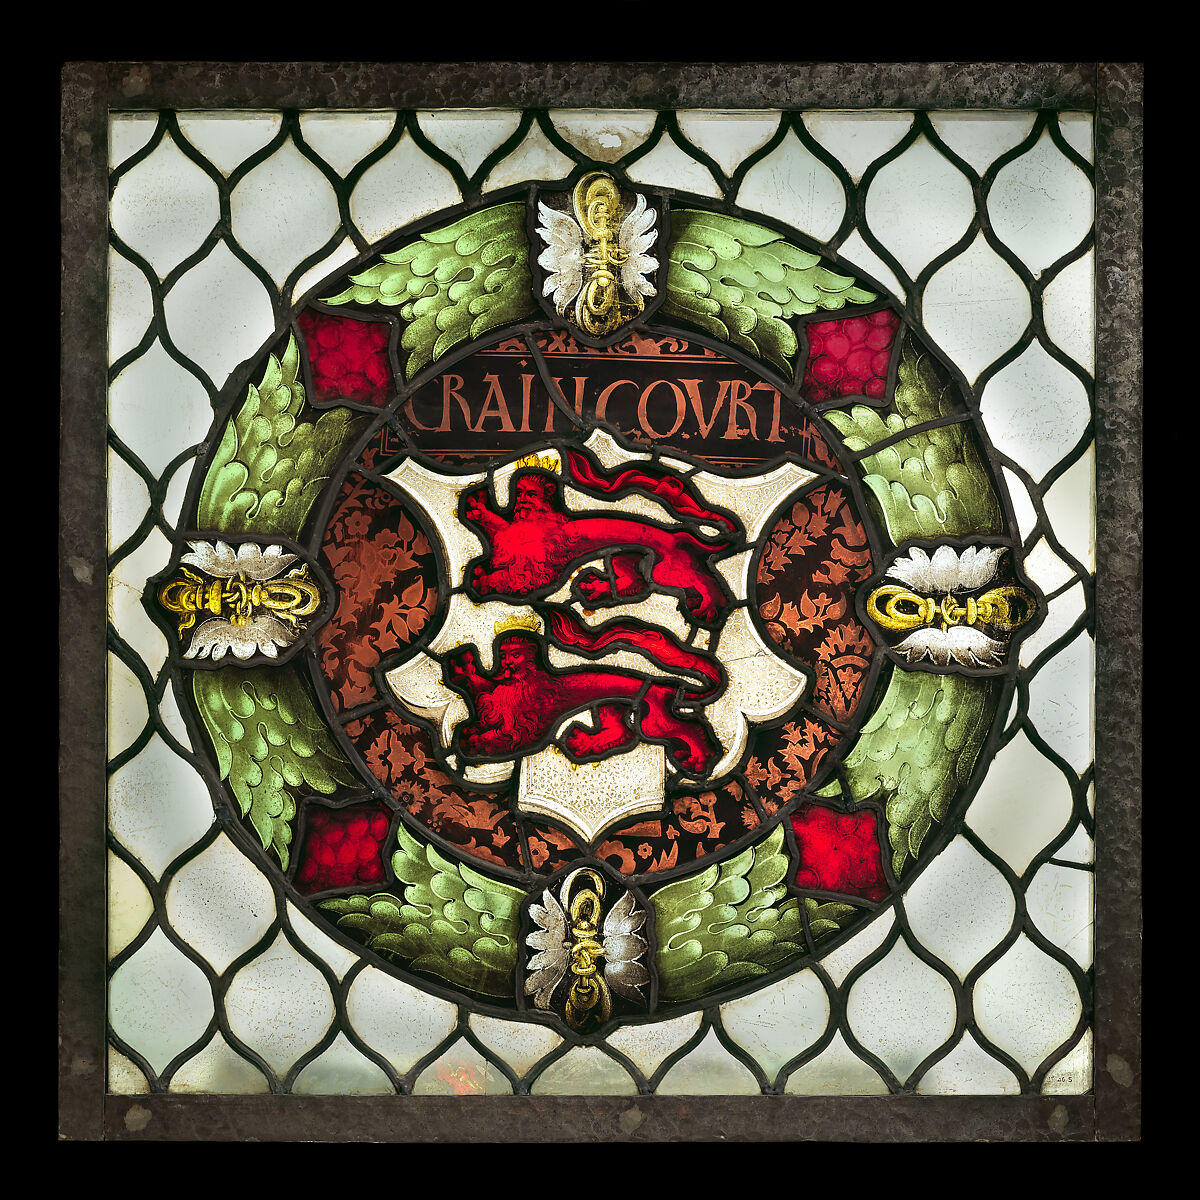 The Craincourt Arms, Valentin Bousch (French, active 1514–41, died 1541), Stained glass, French, Lorraine, Metz 